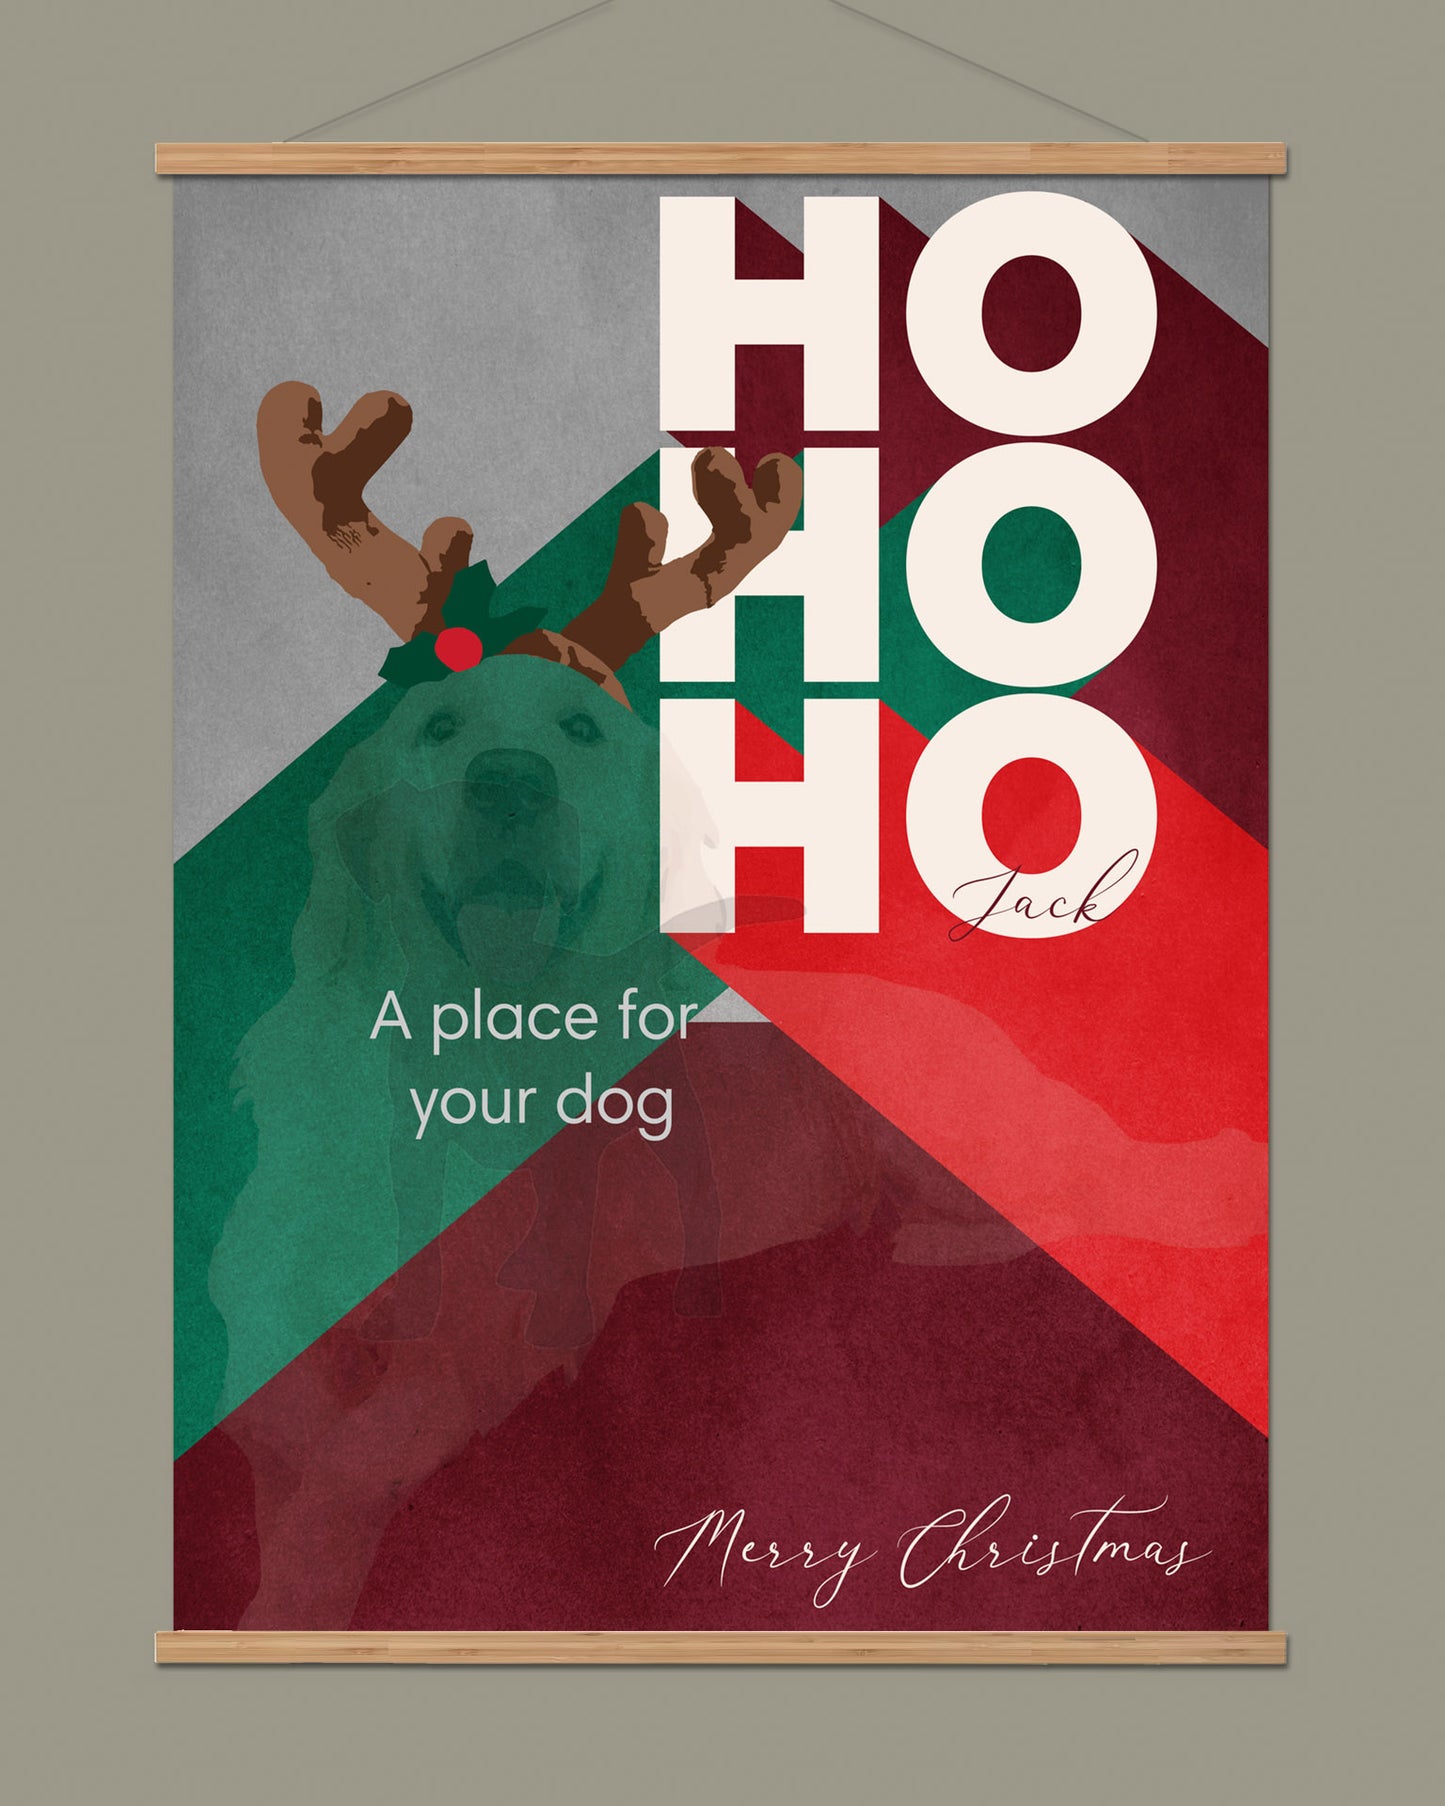 Customized dog poster "Merry Christmas"